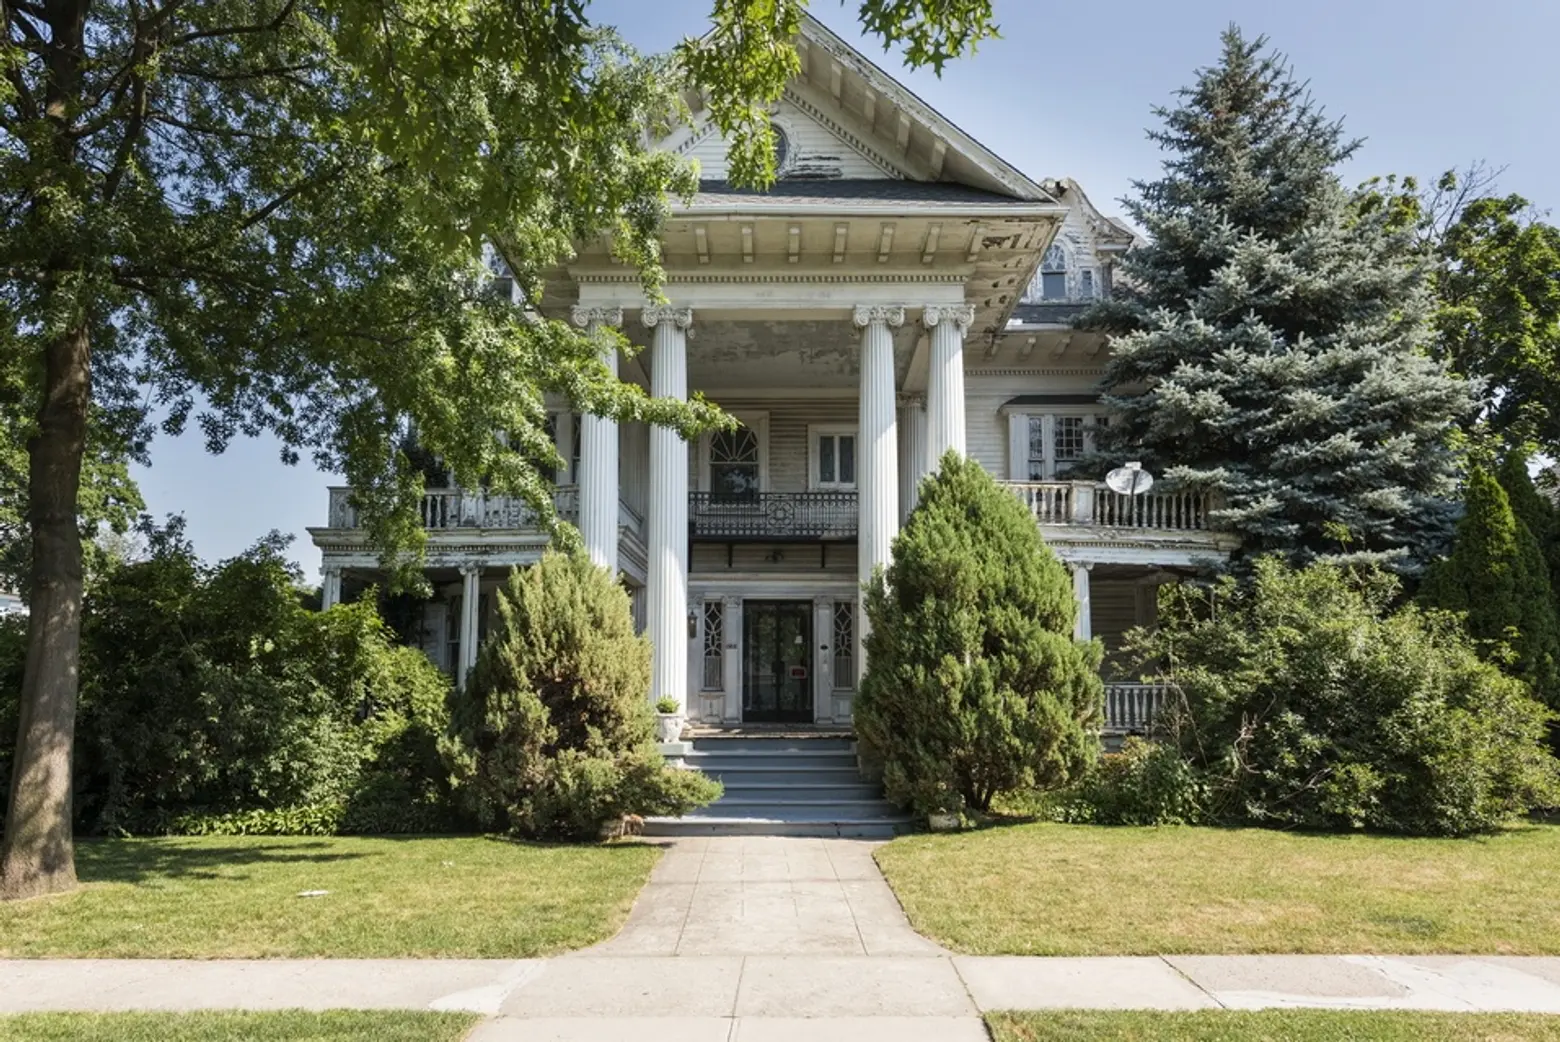 $3M Prospect Park South Mansion on Michelle Williams’ Street Sold in Only Two Hours